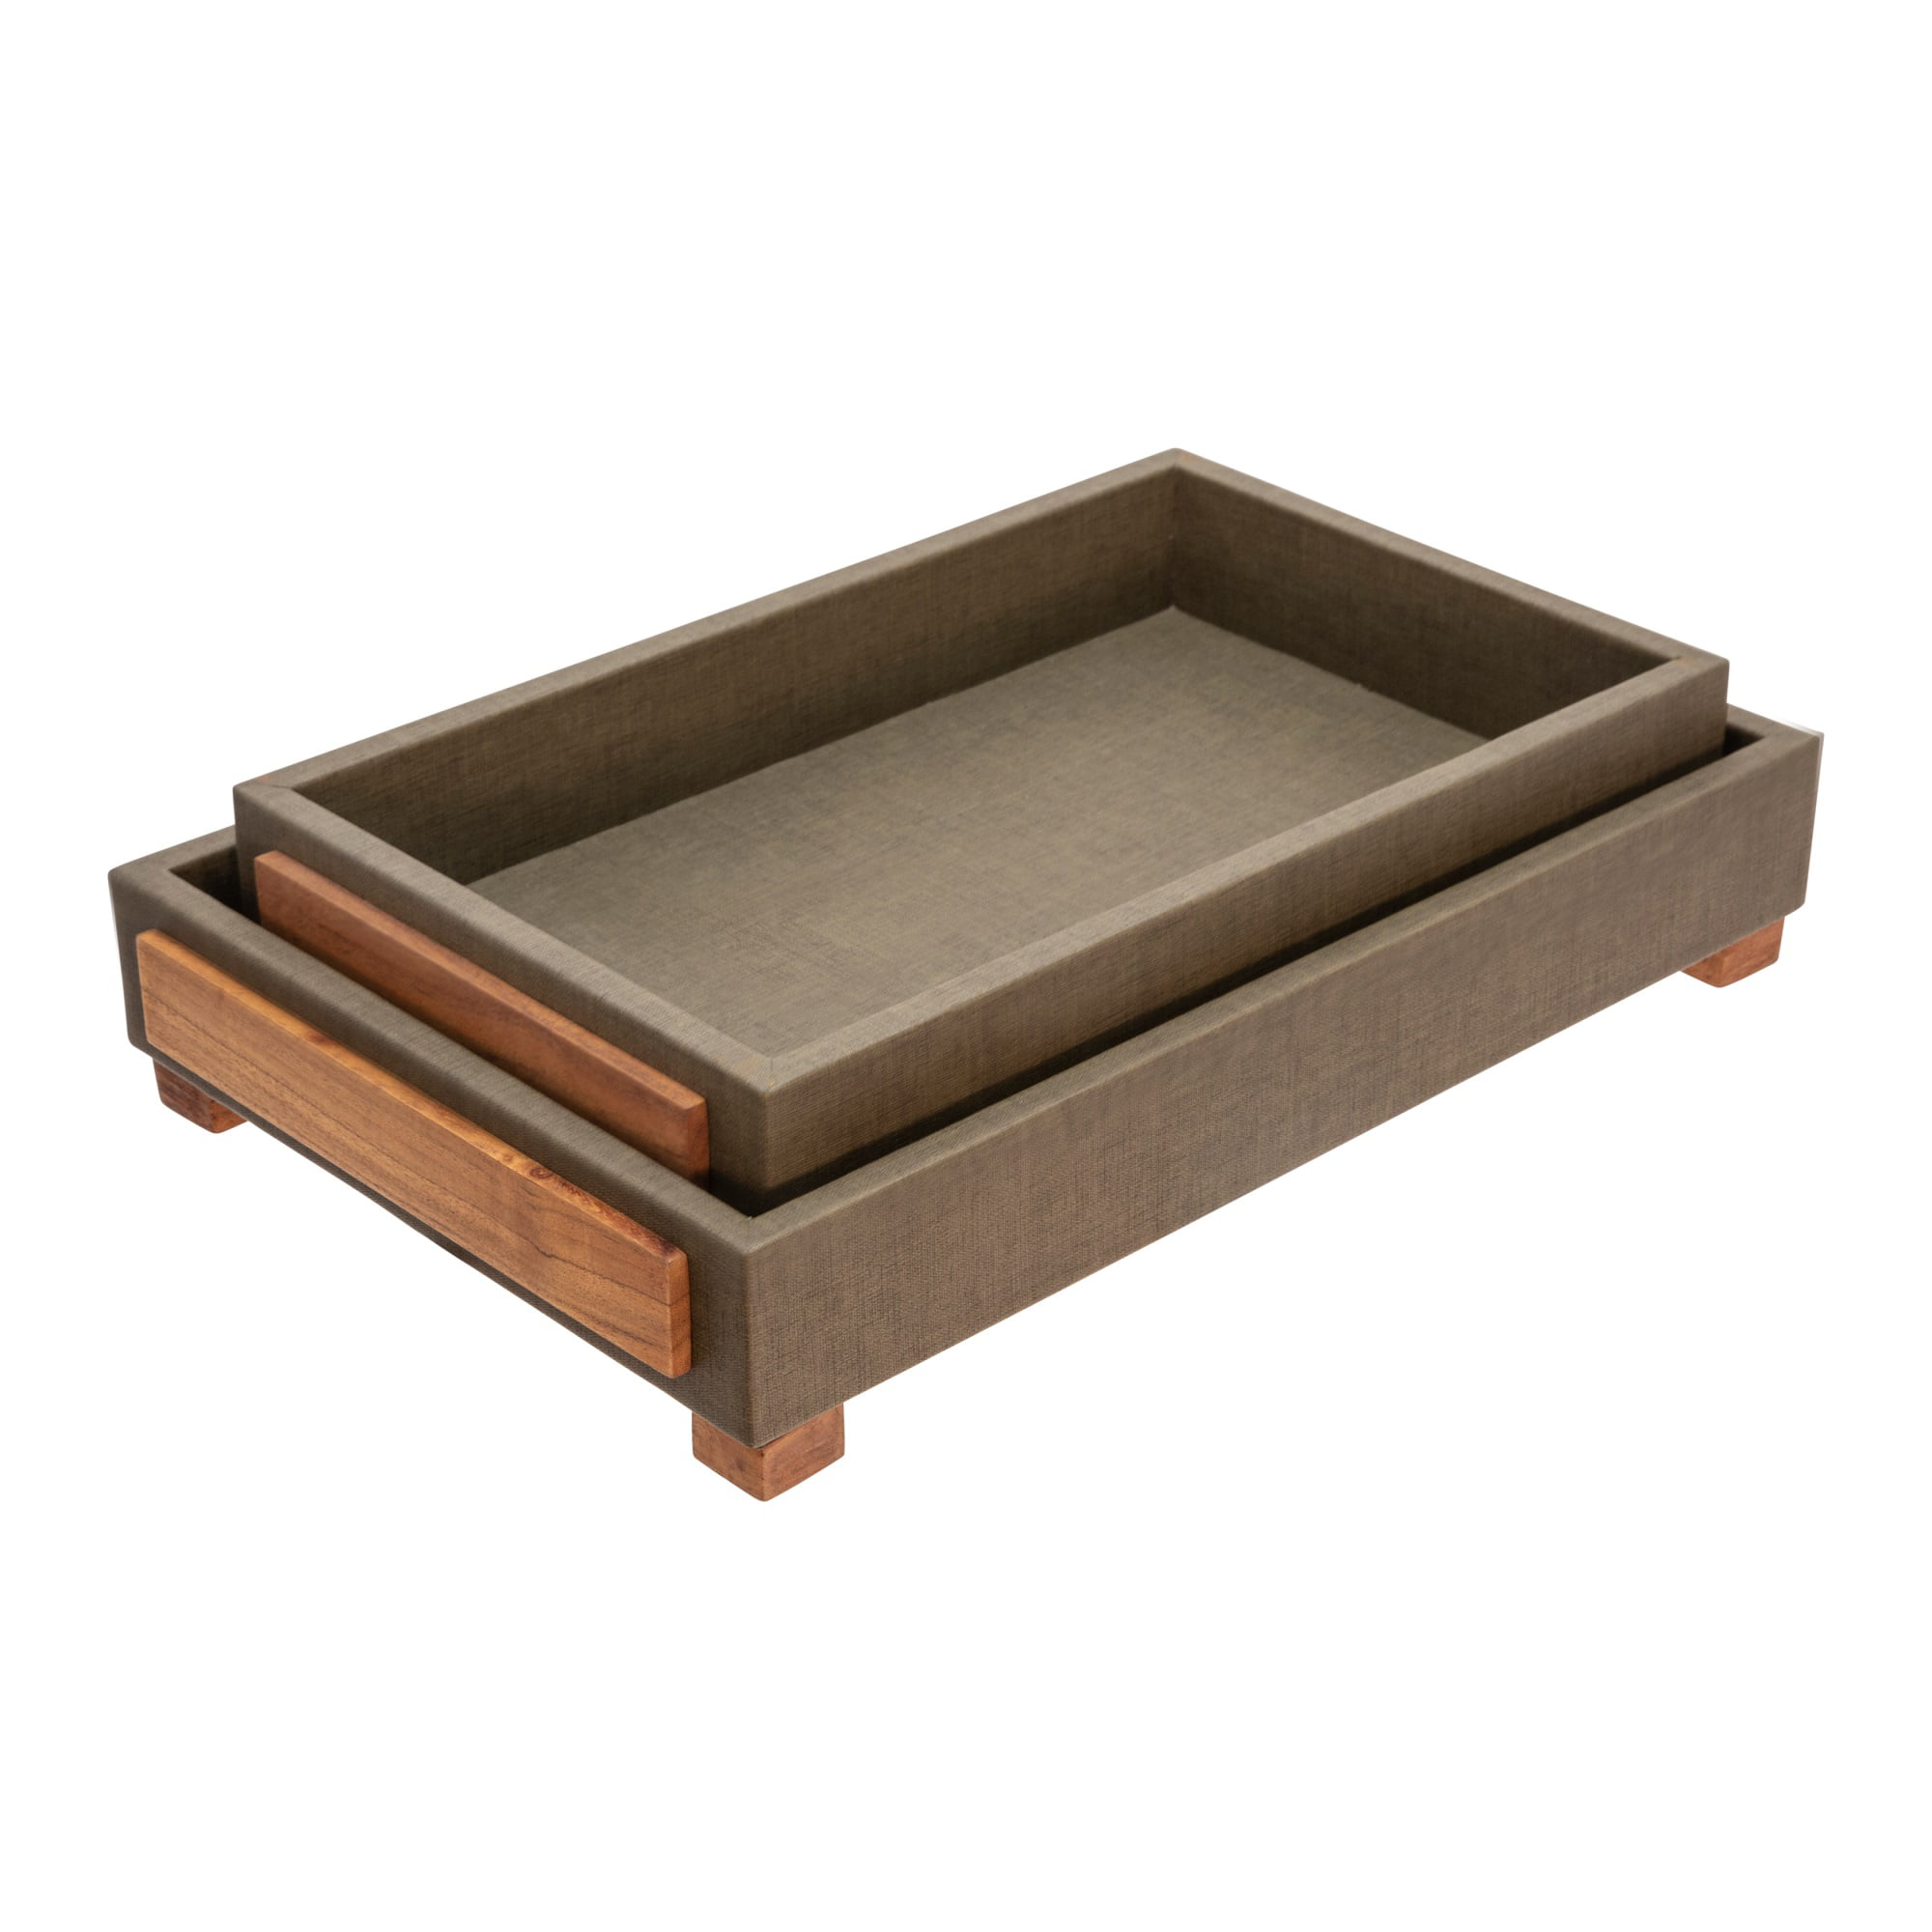 hardwood Bed Tray 3070 Penguin Home Table with Legs-Crafted in Solid Handy Foldable Design-Classic Wood Breakfast Tray-W54 x D35 x H23 cm-Espresso